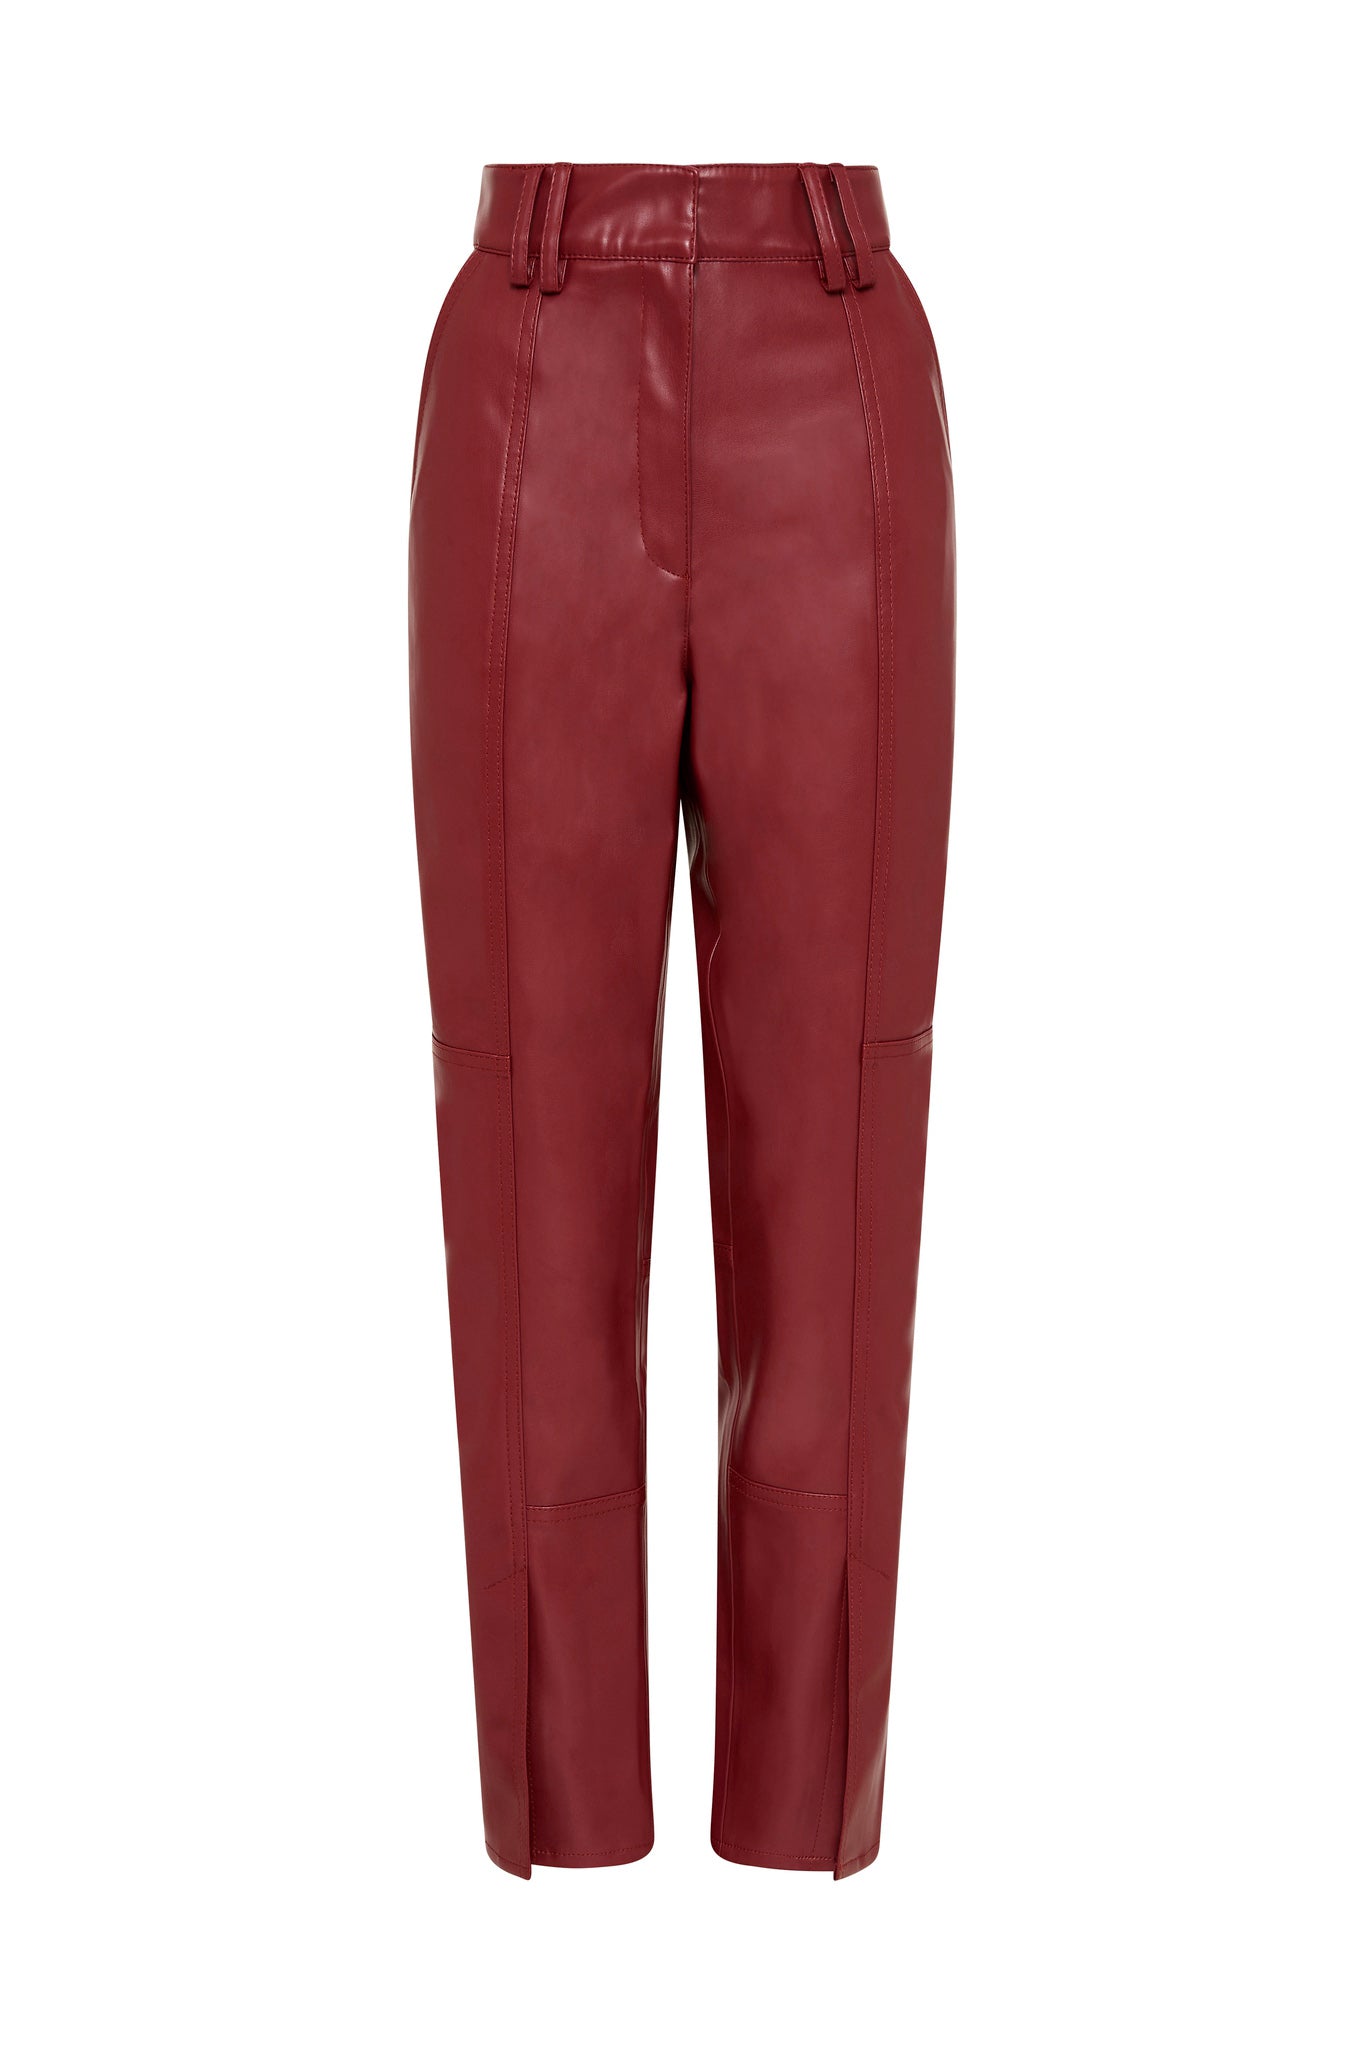 Purchase Wholesale red leather pants. Free Returns & Net 60 Terms on Faire